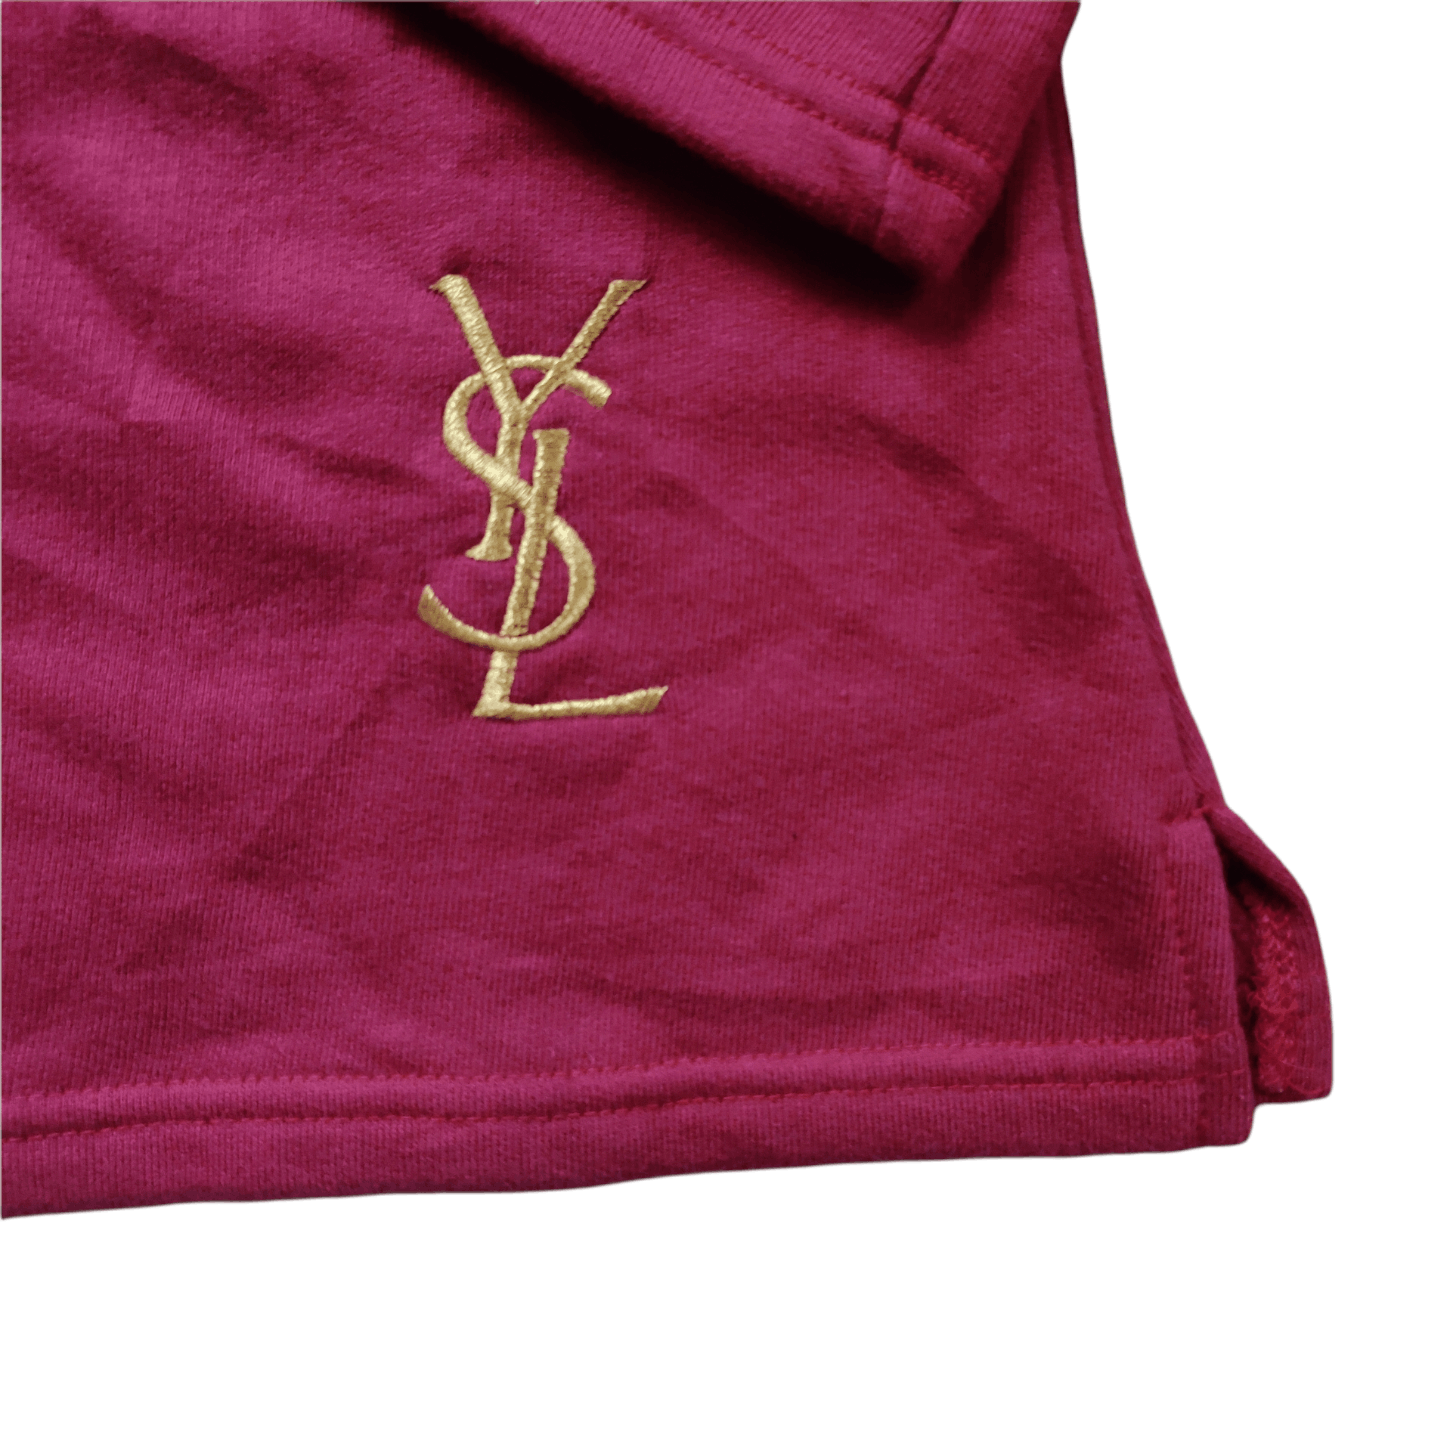 YSL Yves Saint Laurent Women's Gold Embroidery - 5